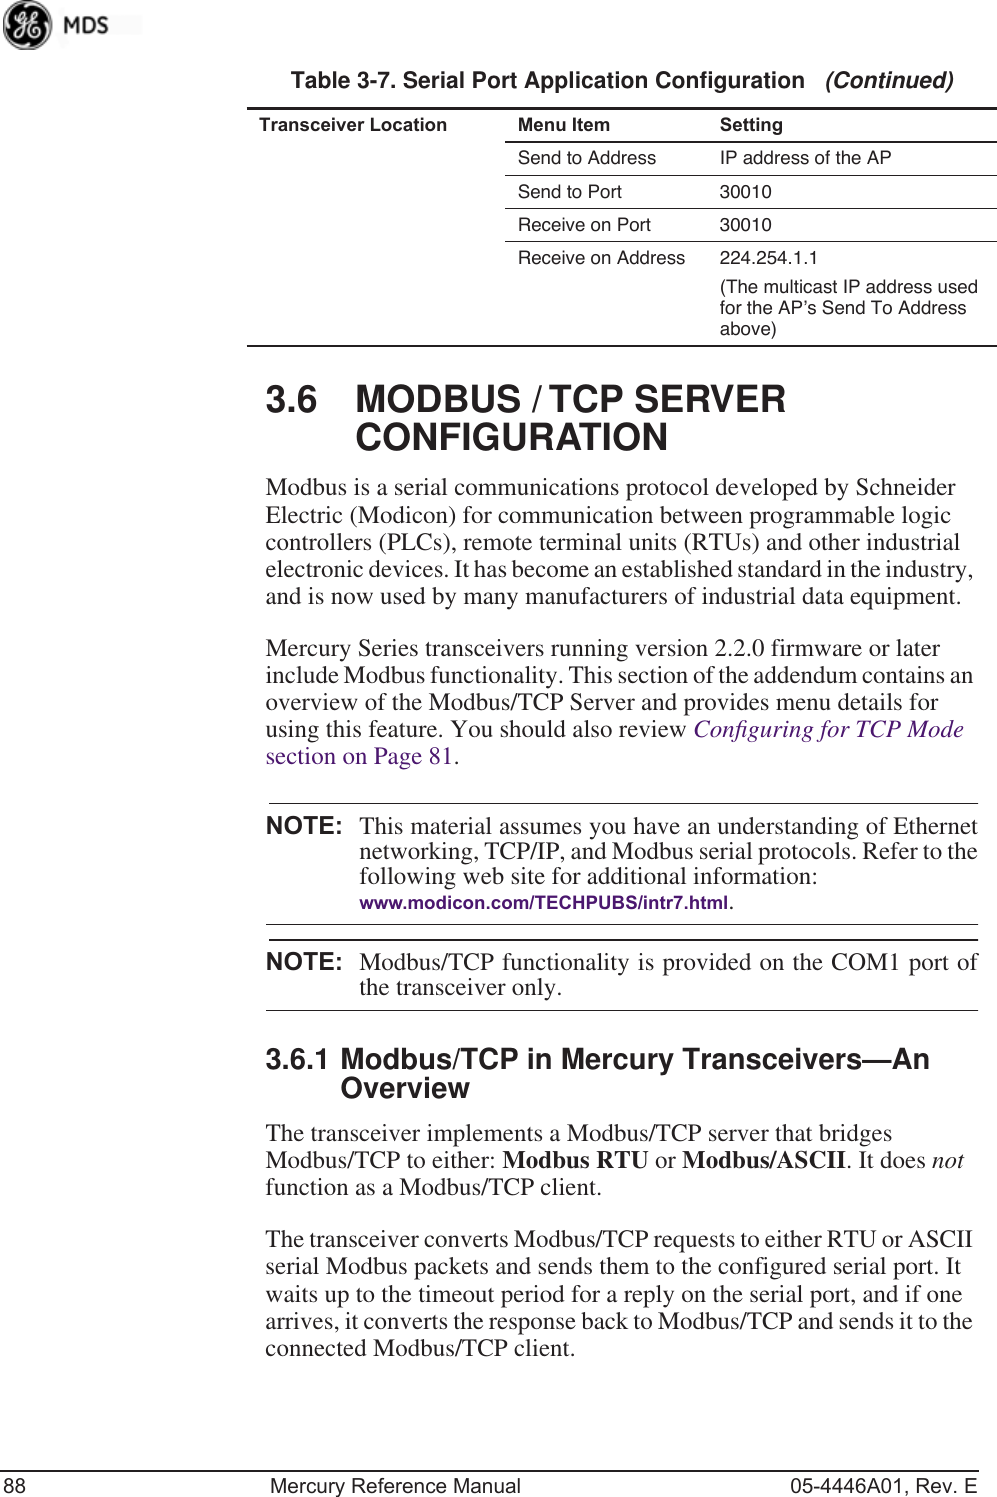 88 Mercury Reference Manual 05-4446A01, Rev. E3.6 MODBUS / TCP SERVER CONFIGURATIONModbus is a serial communications protocol developed by Schneider Electric (Modicon) for communication between programmable logic controllers (PLCs), remote terminal units (RTUs) and other industrial electronic devices. It has become an established standard in the industry, and is now used by many manufacturers of industrial data equipment.Mercury Series transceivers running version 2.2.0 firmware or later include Modbus functionality. This section of the addendum contains an overview of the Modbus/TCP Server and provides menu details for using this feature. You should also review Conﬁguring for TCP Mode  section on Page 81.NOTE: This material assumes you have an understanding of Ethernetnetworking, TCP/IP, and Modbus serial protocols. Refer to thefollowing web site for additional information:www.modicon.com/TECHPUBS/intr7.html.NOTE: Modbus/TCP functionality is provided on the COM1 port ofthe transceiver only.3.6.1 Modbus/TCP in Mercury Transceivers—An OverviewThe transceiver implements a Modbus/TCP server that bridges Modbus/TCP to either: Modbus RTU or Modbus/ASCII. It does not function as a Modbus/TCP client.The transceiver converts Modbus/TCP requests to either RTU or ASCII serial Modbus packets and sends them to the configured serial port. It waits up to the timeout period for a reply on the serial port, and if one arrives, it converts the response back to Modbus/TCP and sends it to the connected Modbus/TCP client.Send to Address IP address of the APSend to Port 30010 Receive on Port 30010 Receive on Address 224.254.1.1(The multicast IP address used for the AP’s Send To Address above)Table 3-7. Serial Port Application Configuration   (Continued)Transceiver Location Menu Item Setting